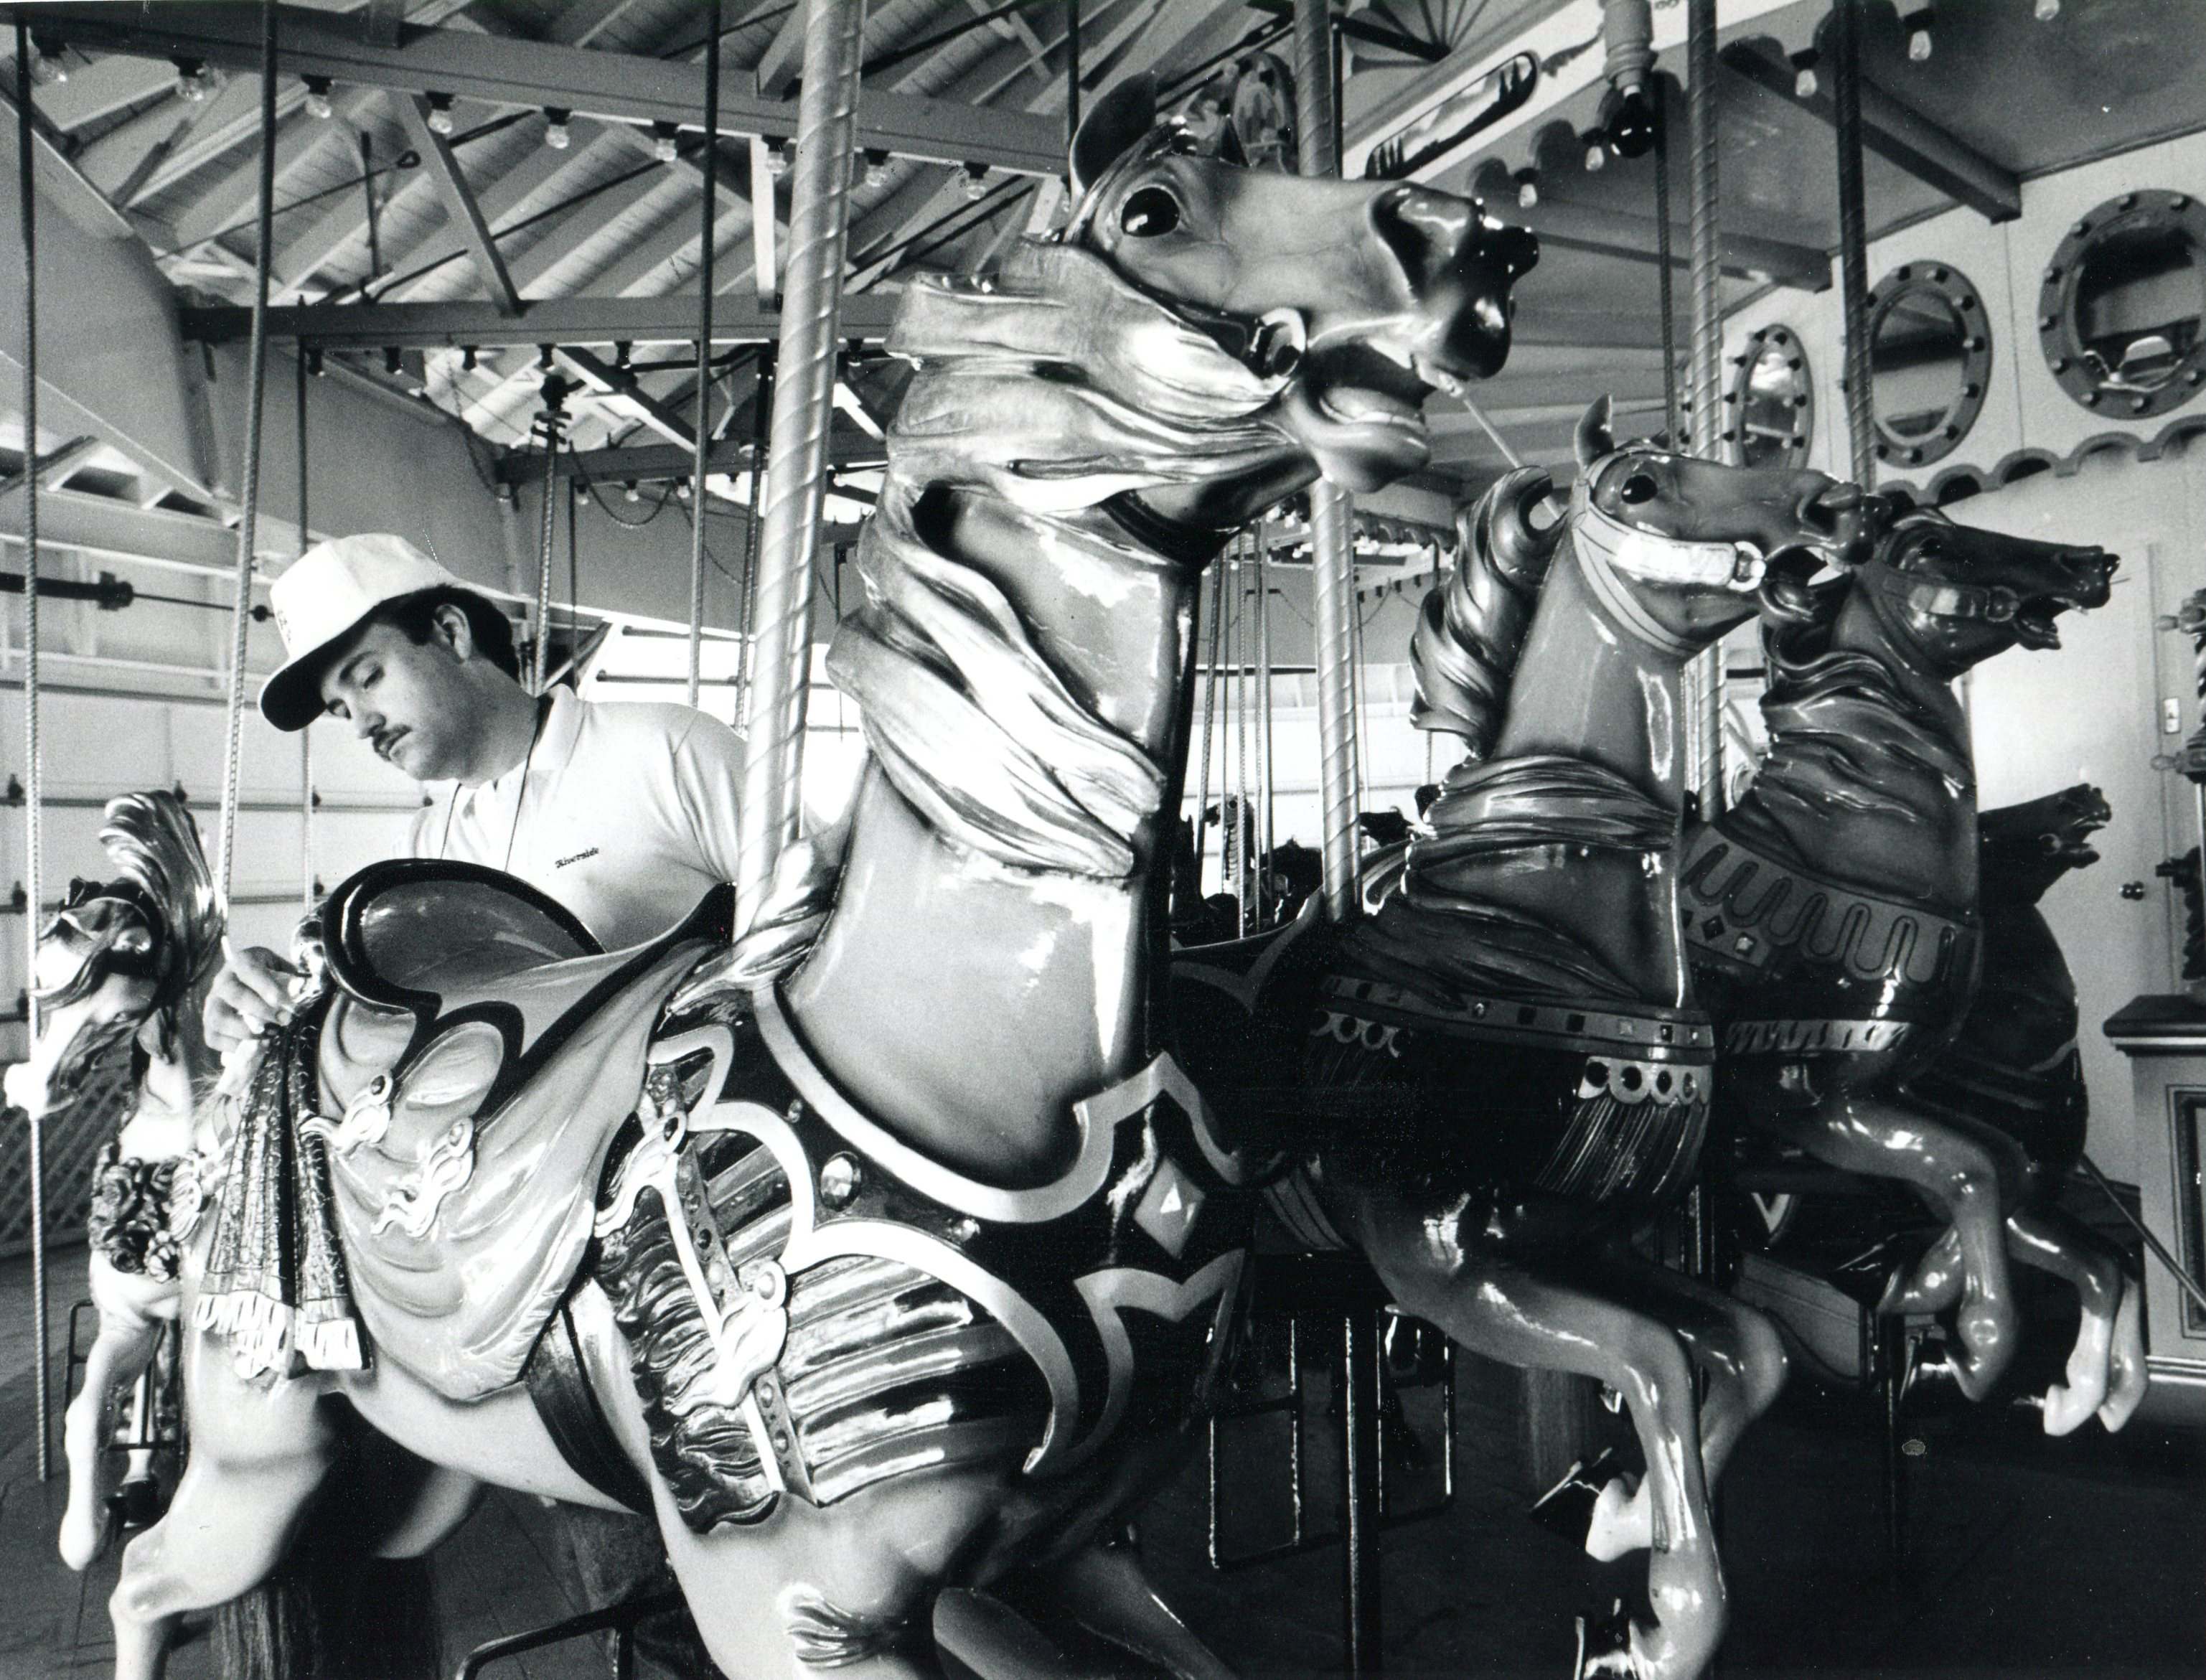 May 13, 1988 - Agawam - William Jatkevicius, manager of maintenance at Riverside Park, cleans one of the horses on the park's 1909 carousel. (Republican file photo) Staff-Shot